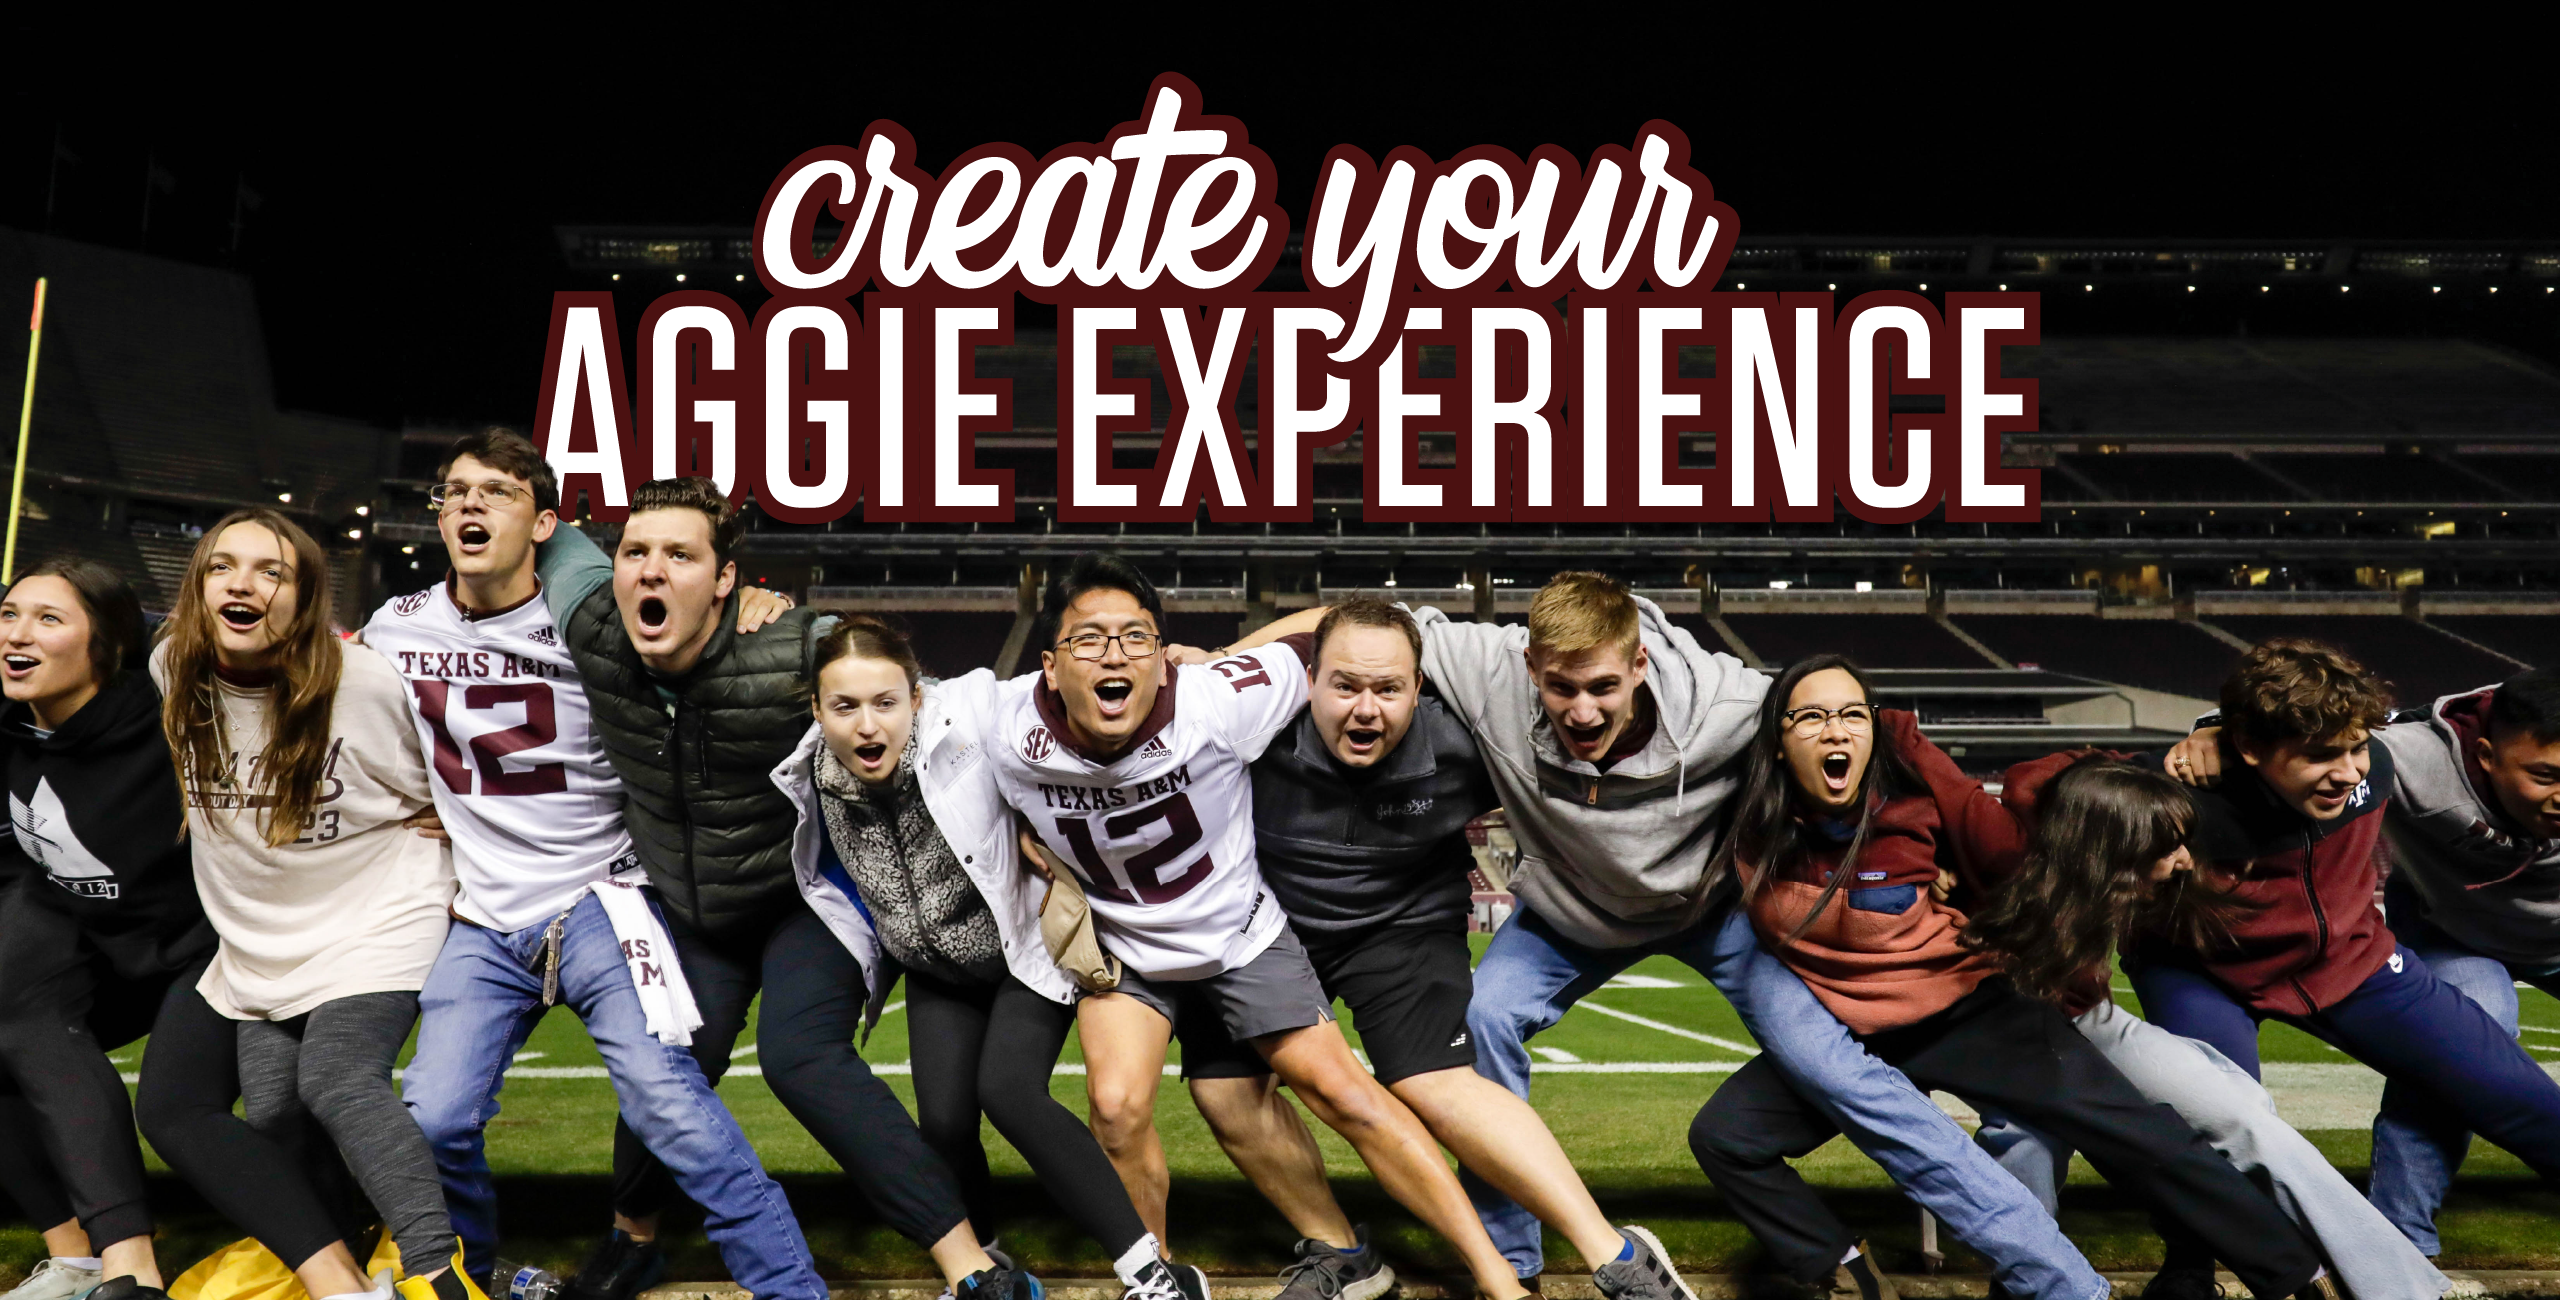 Text create your aggie experience above a line of students singing the war hymn